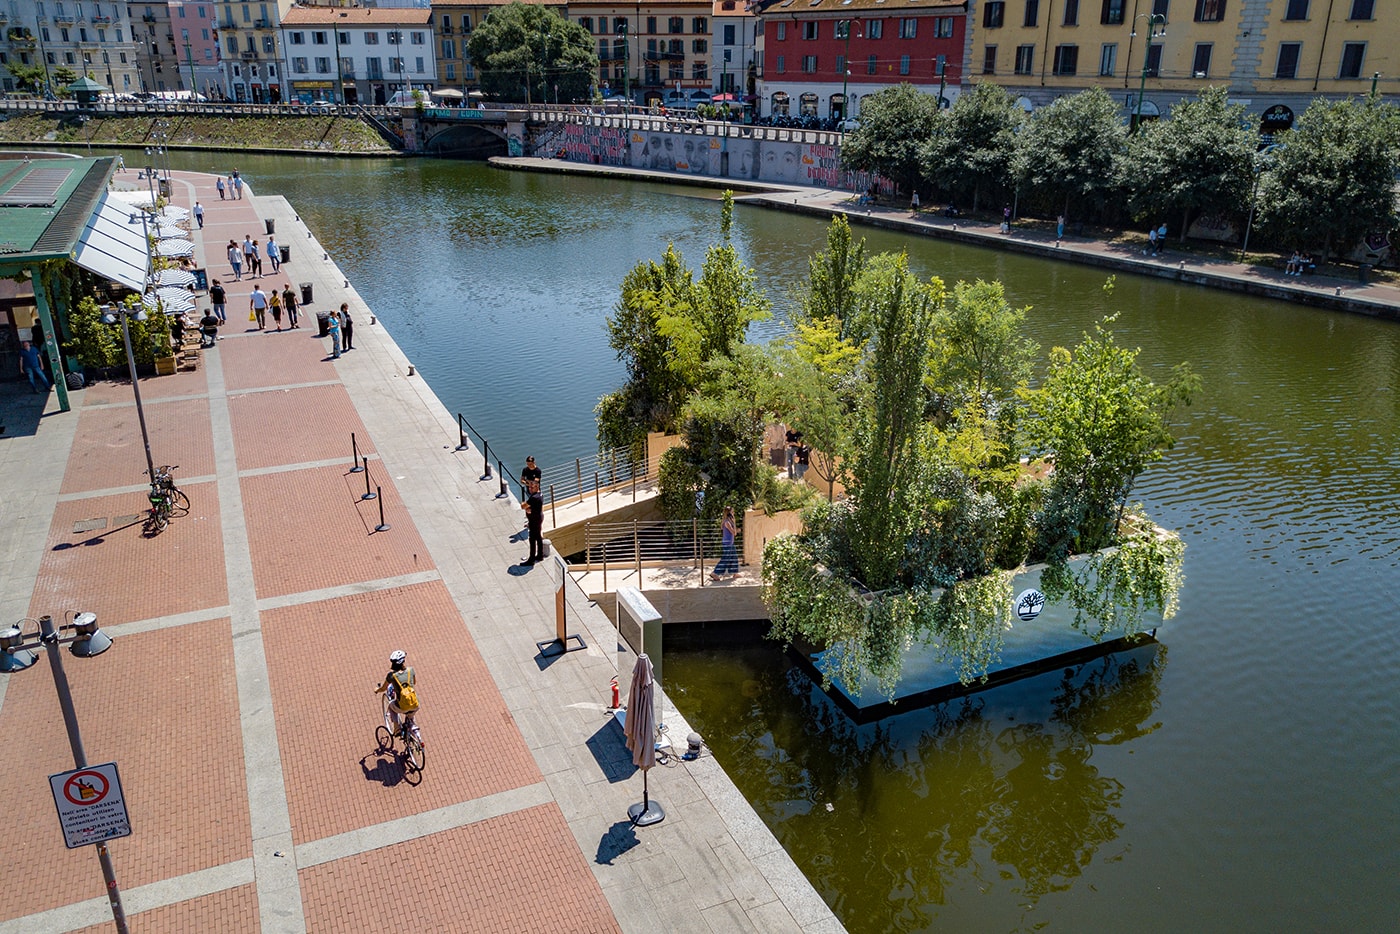 Stefano Boeri Creates "Floating Forest" for Timberland 